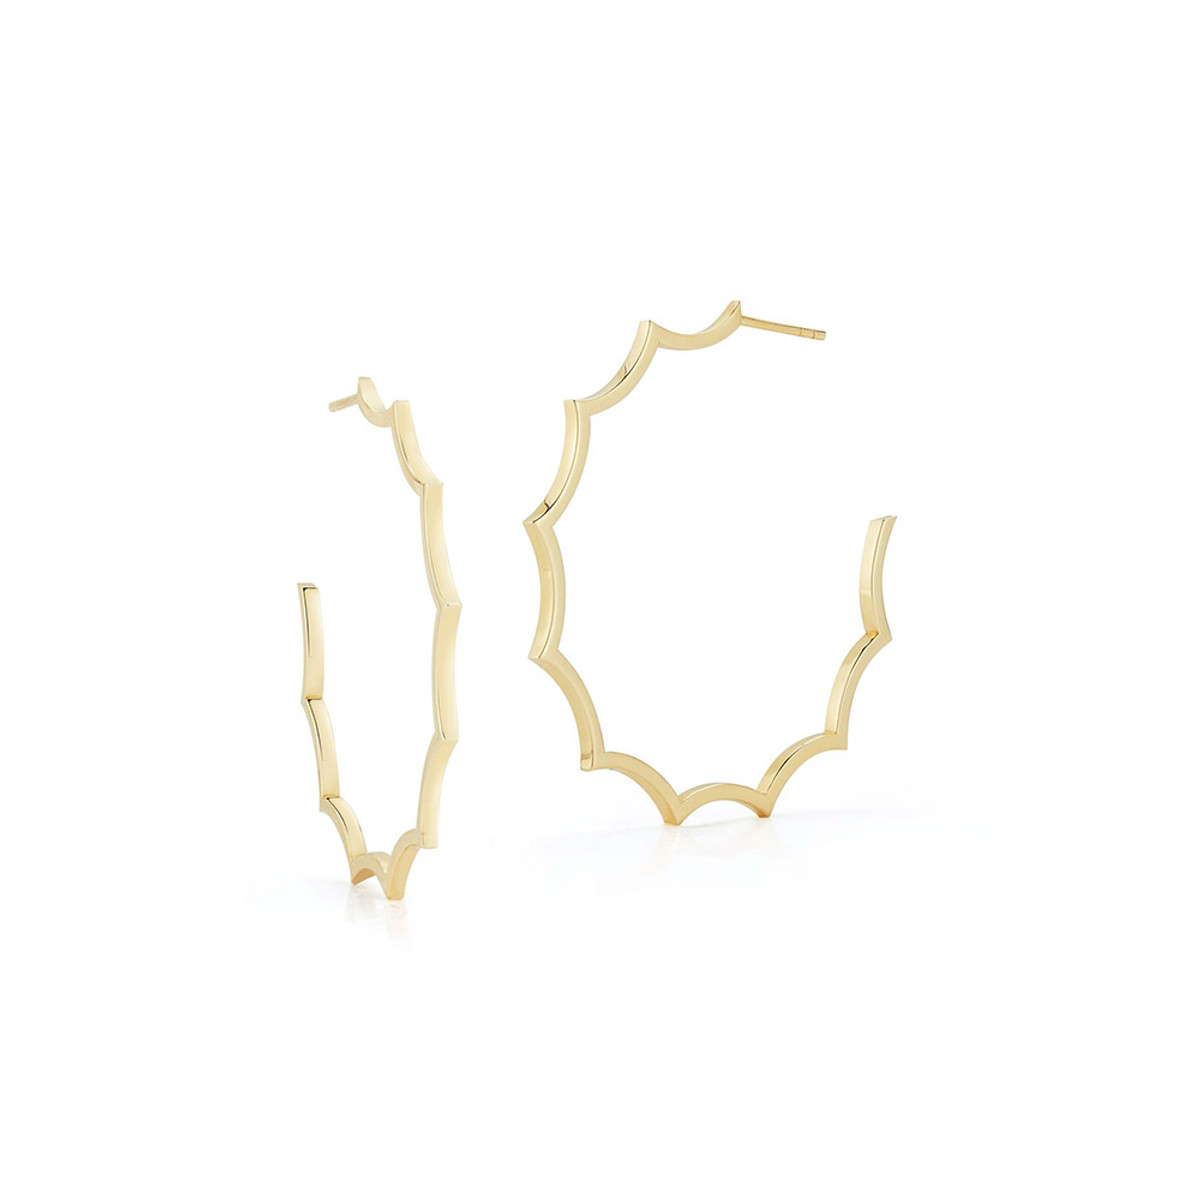 Walters Faith Clive 18K Yellow Gold Scalloped Hoop Earrings-56178 Product Image